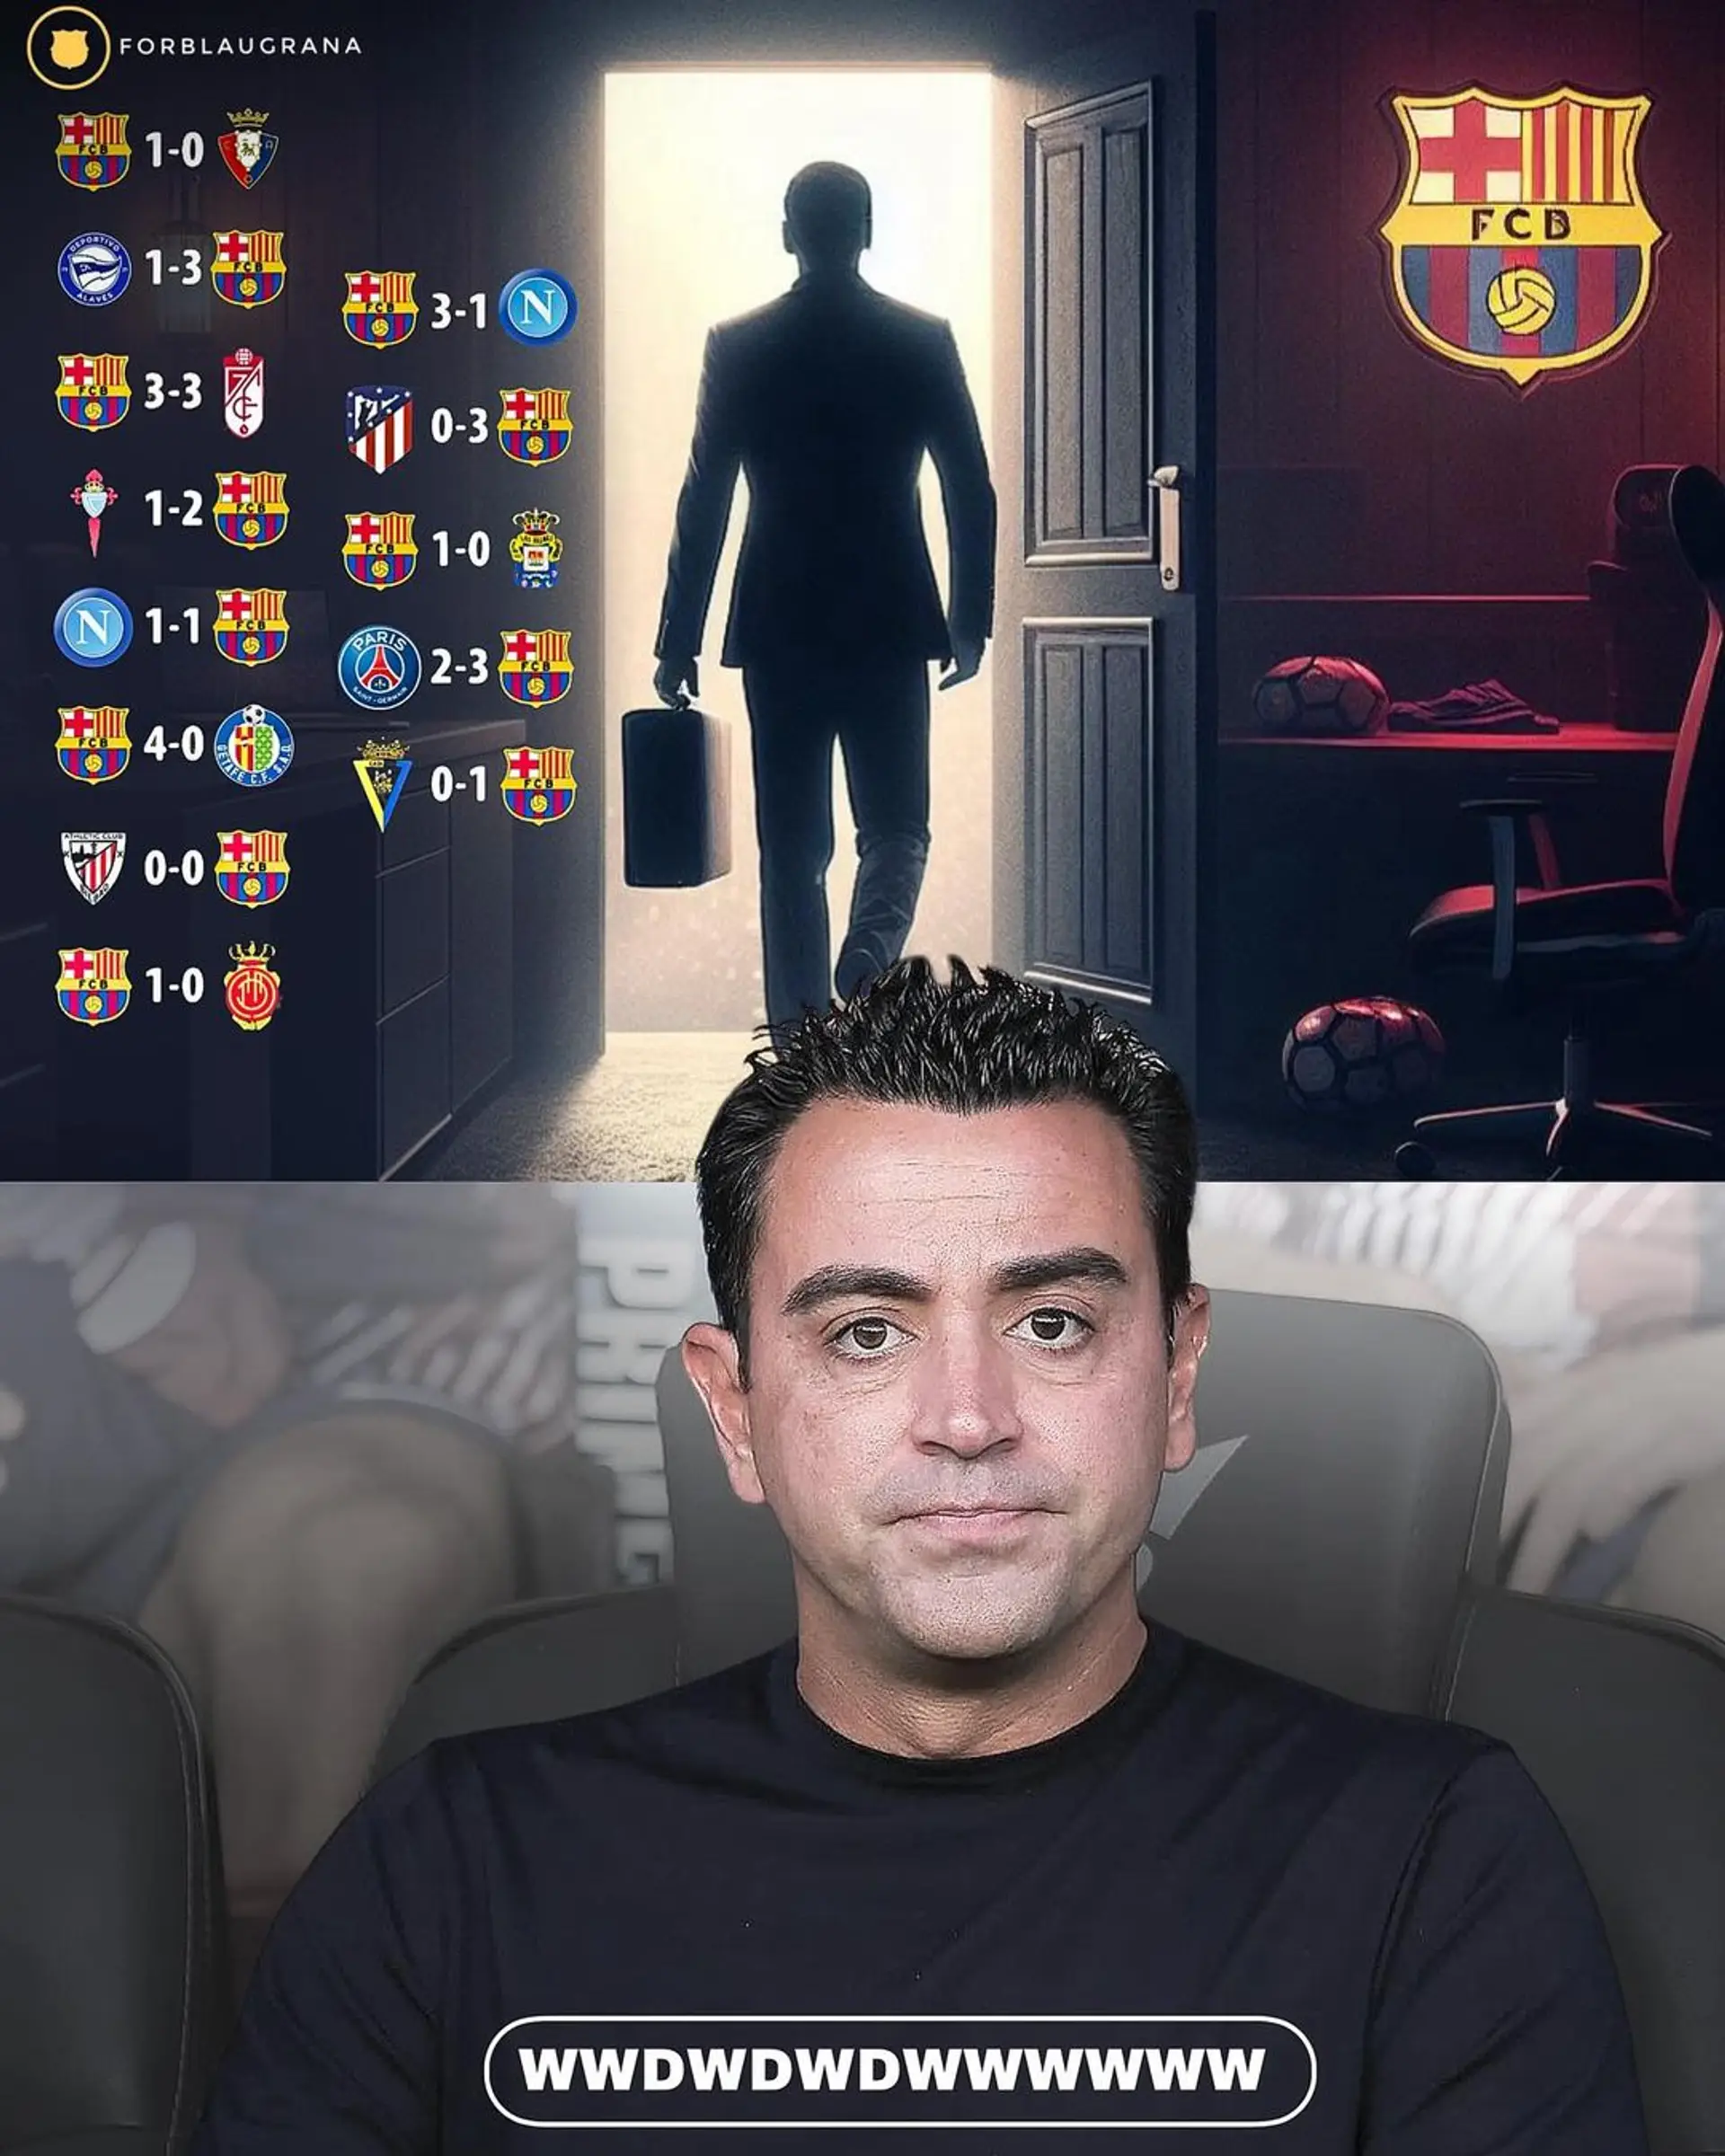 📸| All Barca results ever since Xavi announced his departure.